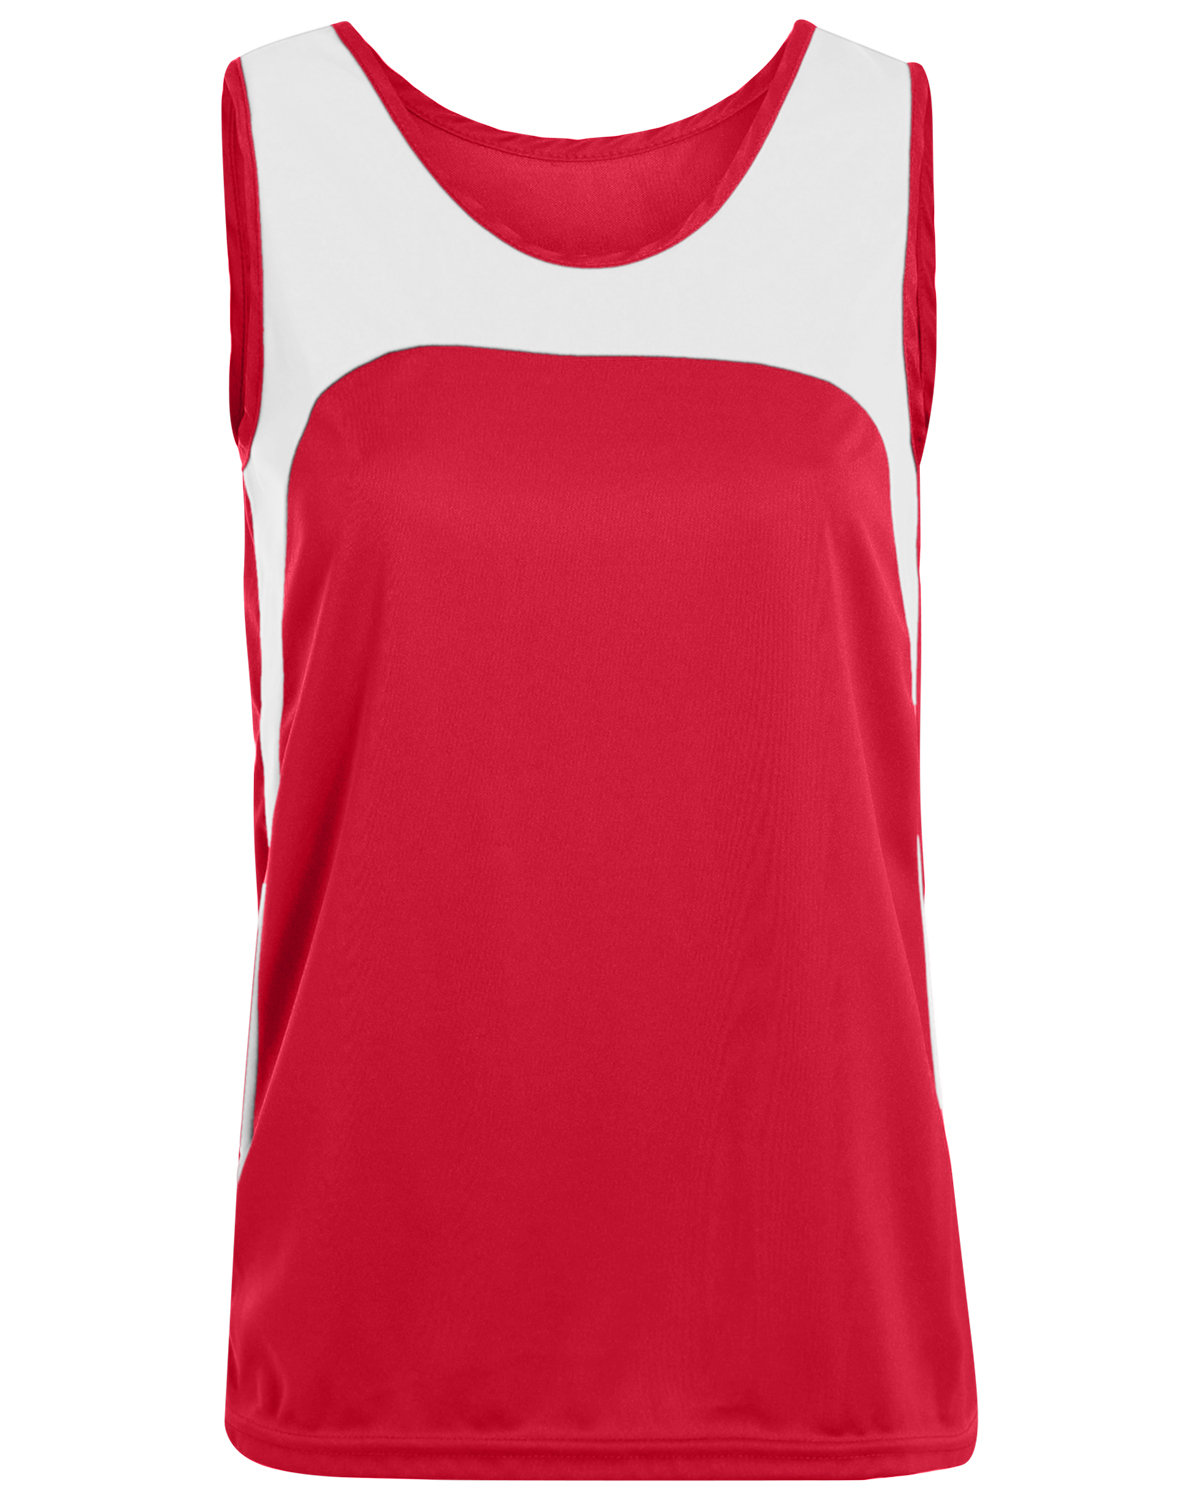 Augusta Sportswear Ladies Wicking Polyester Sleeveless Jersey with Contrast Inserts